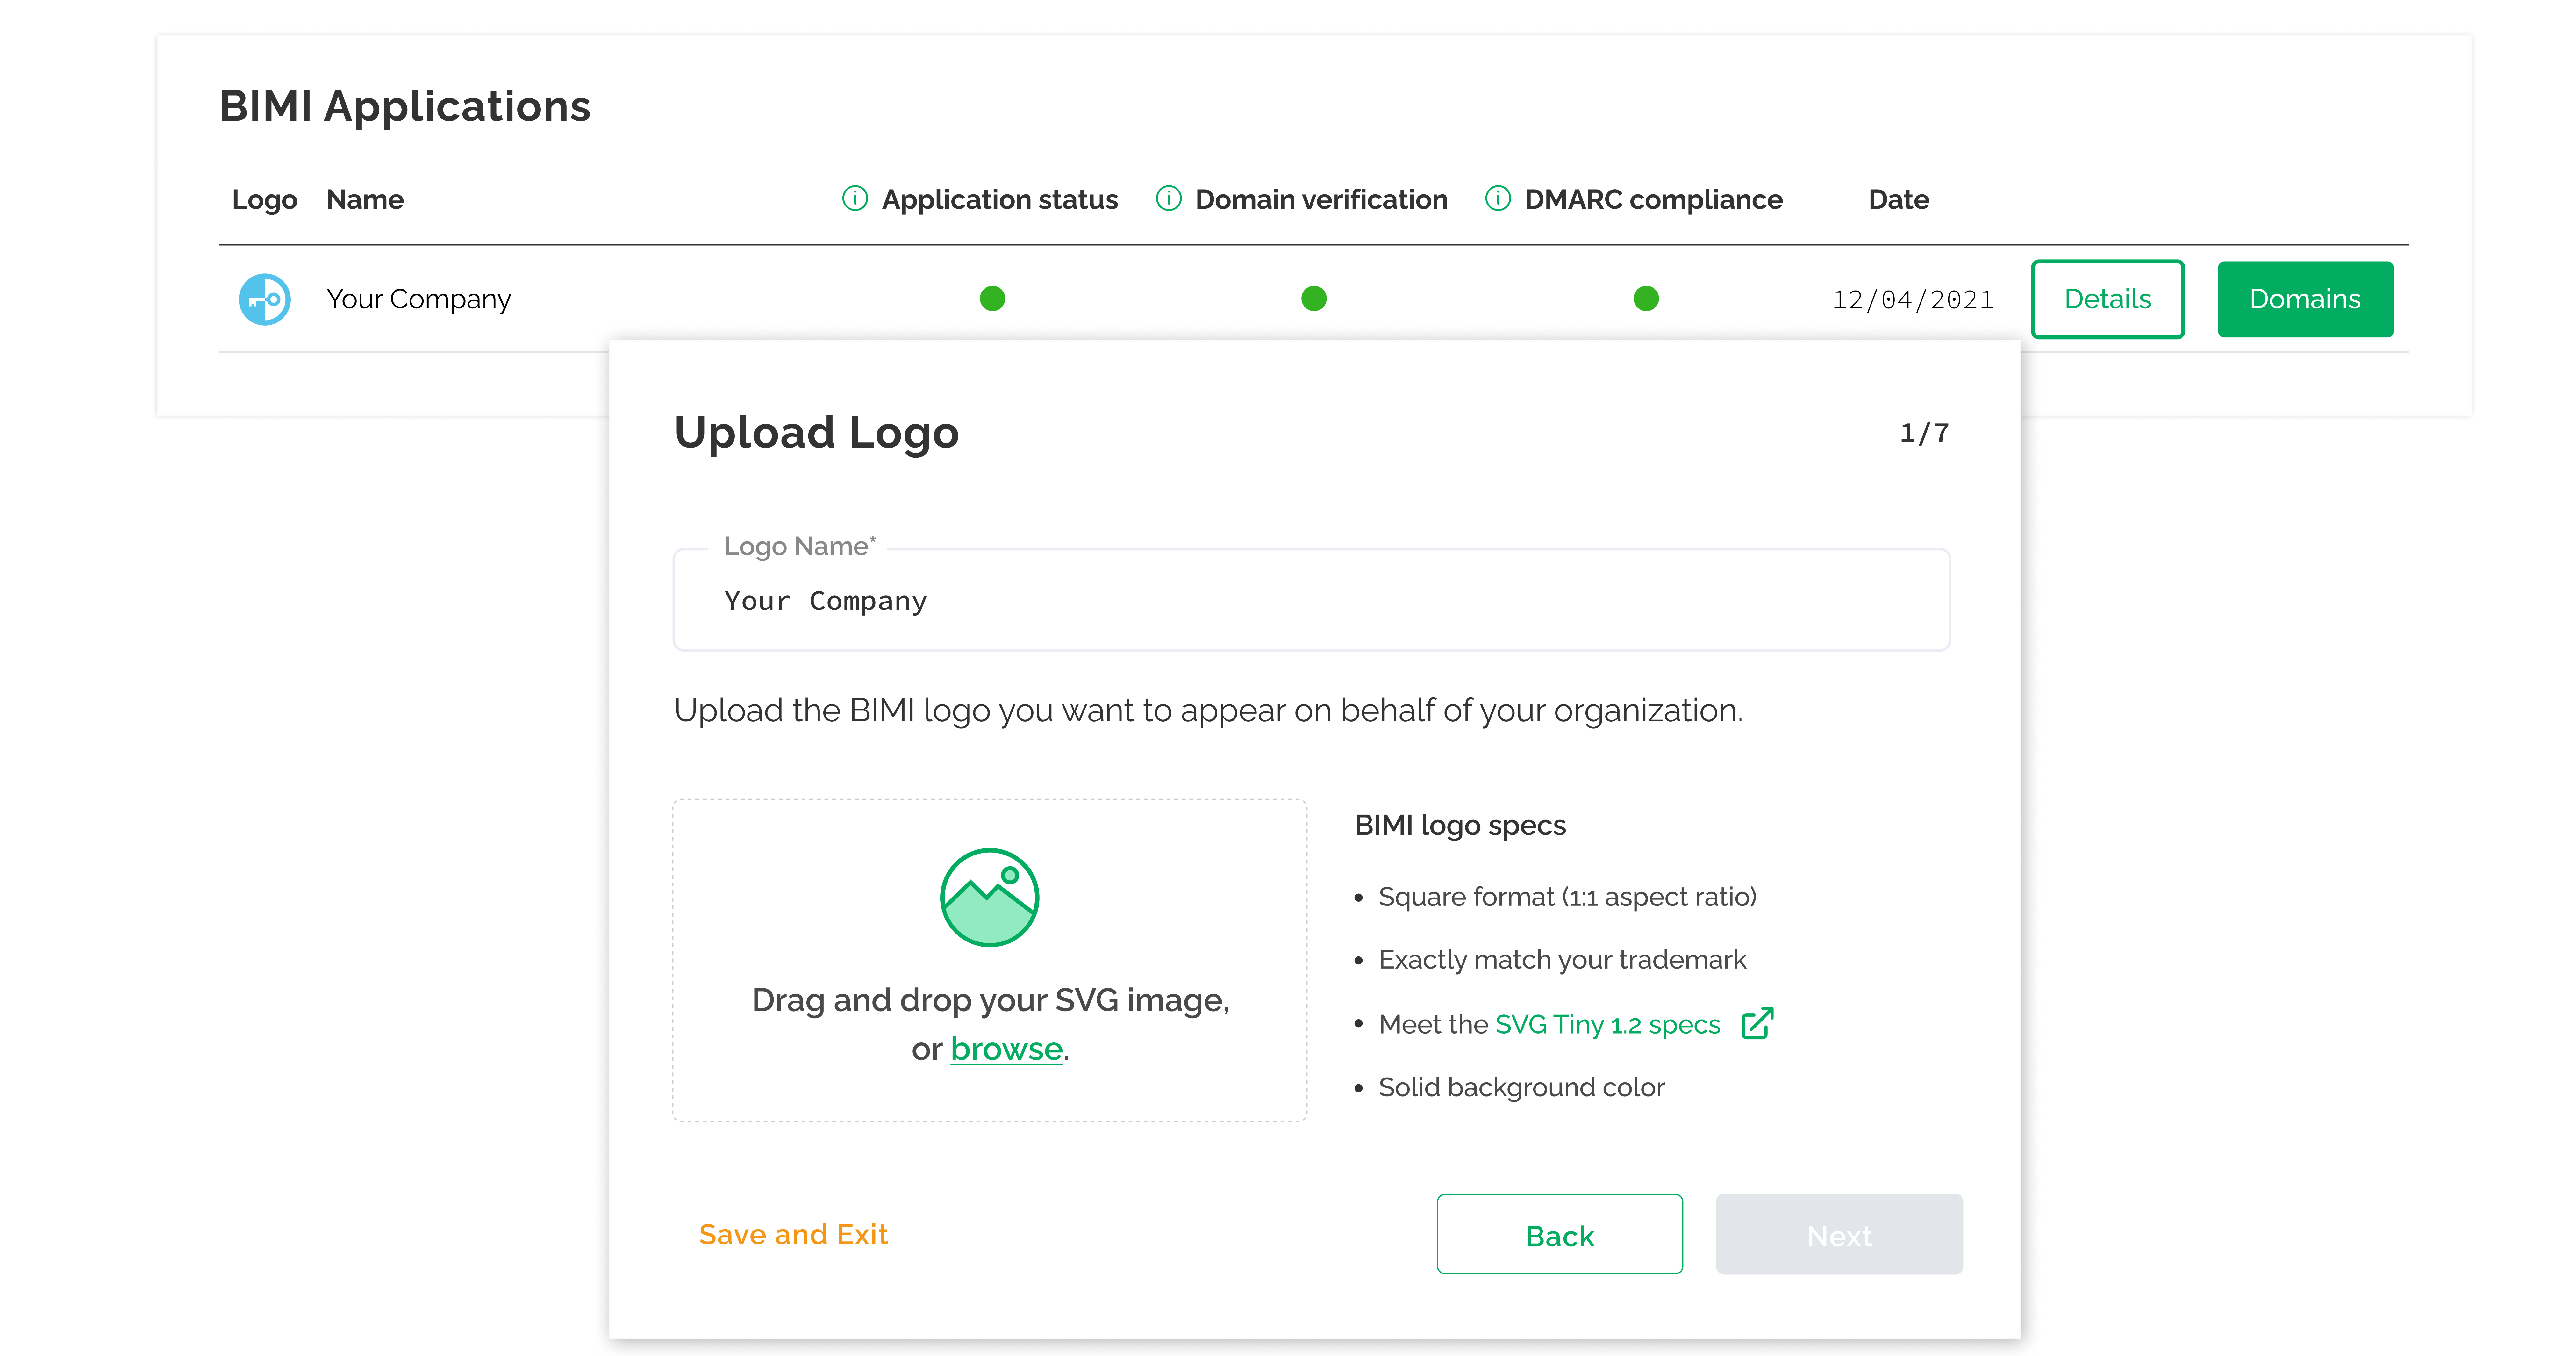 BIMI - Upload your trademarked logo directly within OnDMARC to begin the process of obtaining your Verified Mark Certificate (VMC) and displaying your logo within recipient's inboxes.